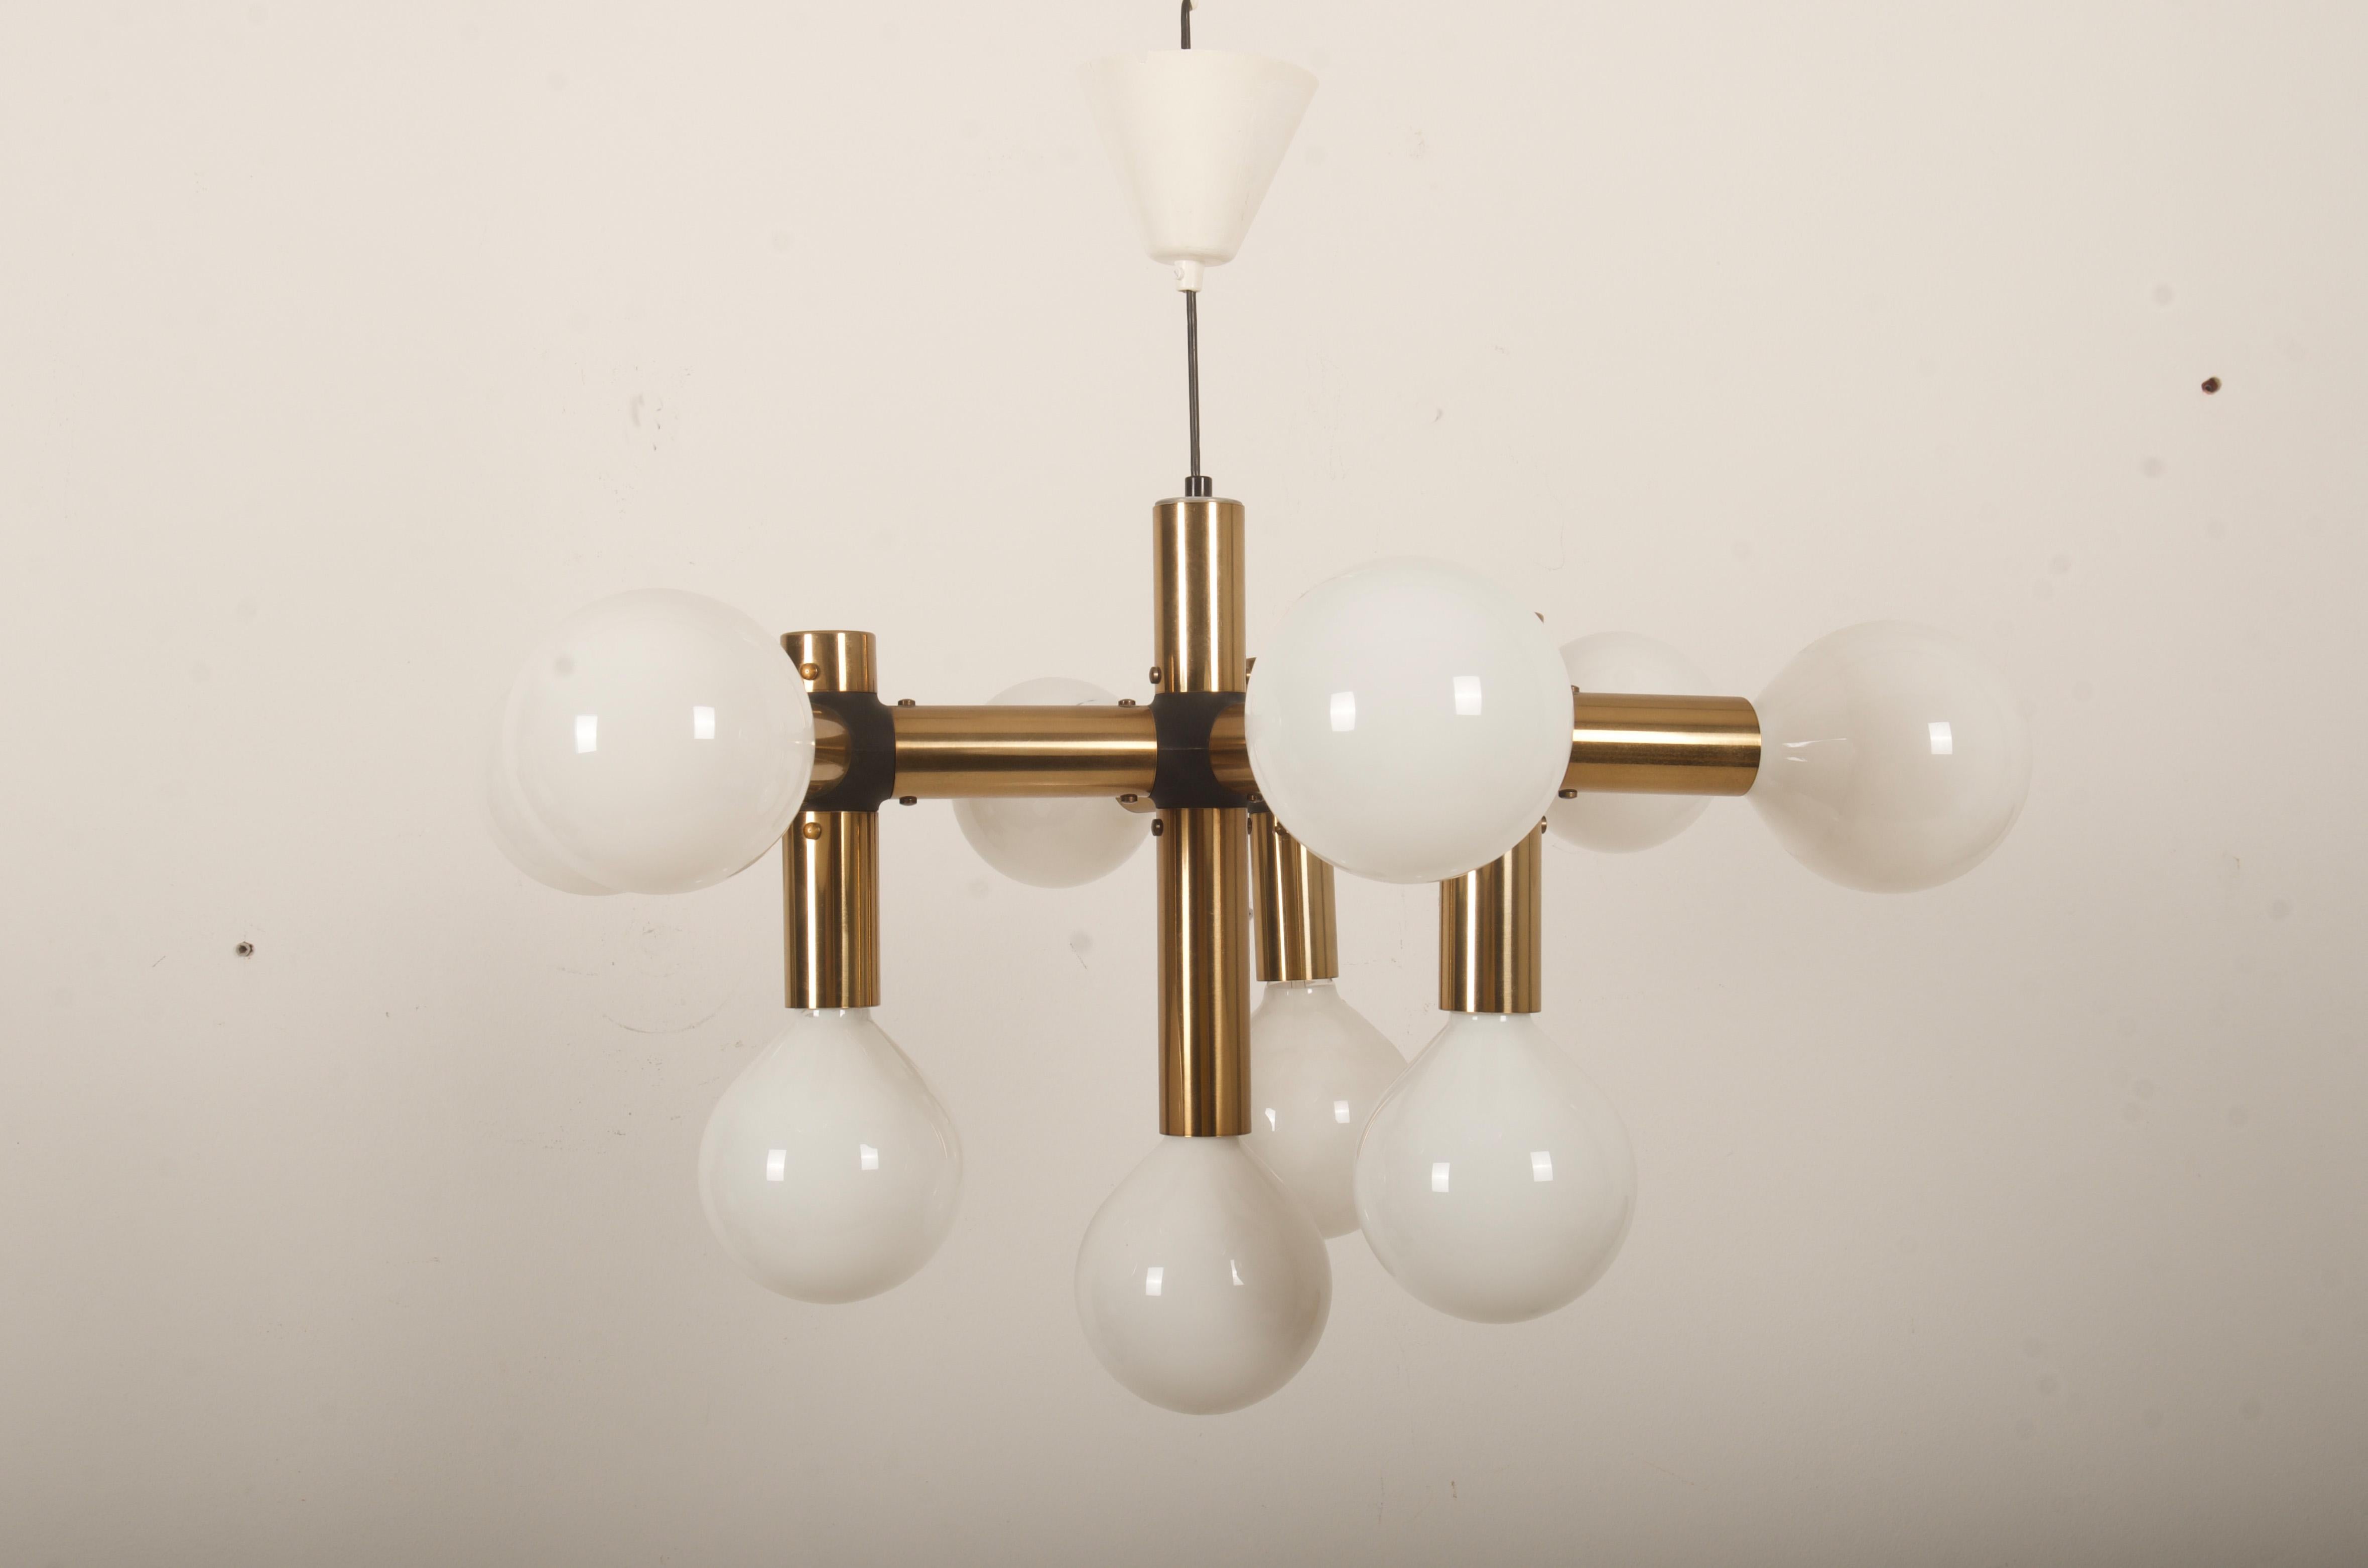 Trix and Robert Haussmann from the series C 300, produced by Swiss Lamps International in the 1960s, resembling an atomic core. gold-colored aluminium, black plastic connections, original filament bulbs, which can also be replaced by modern LED